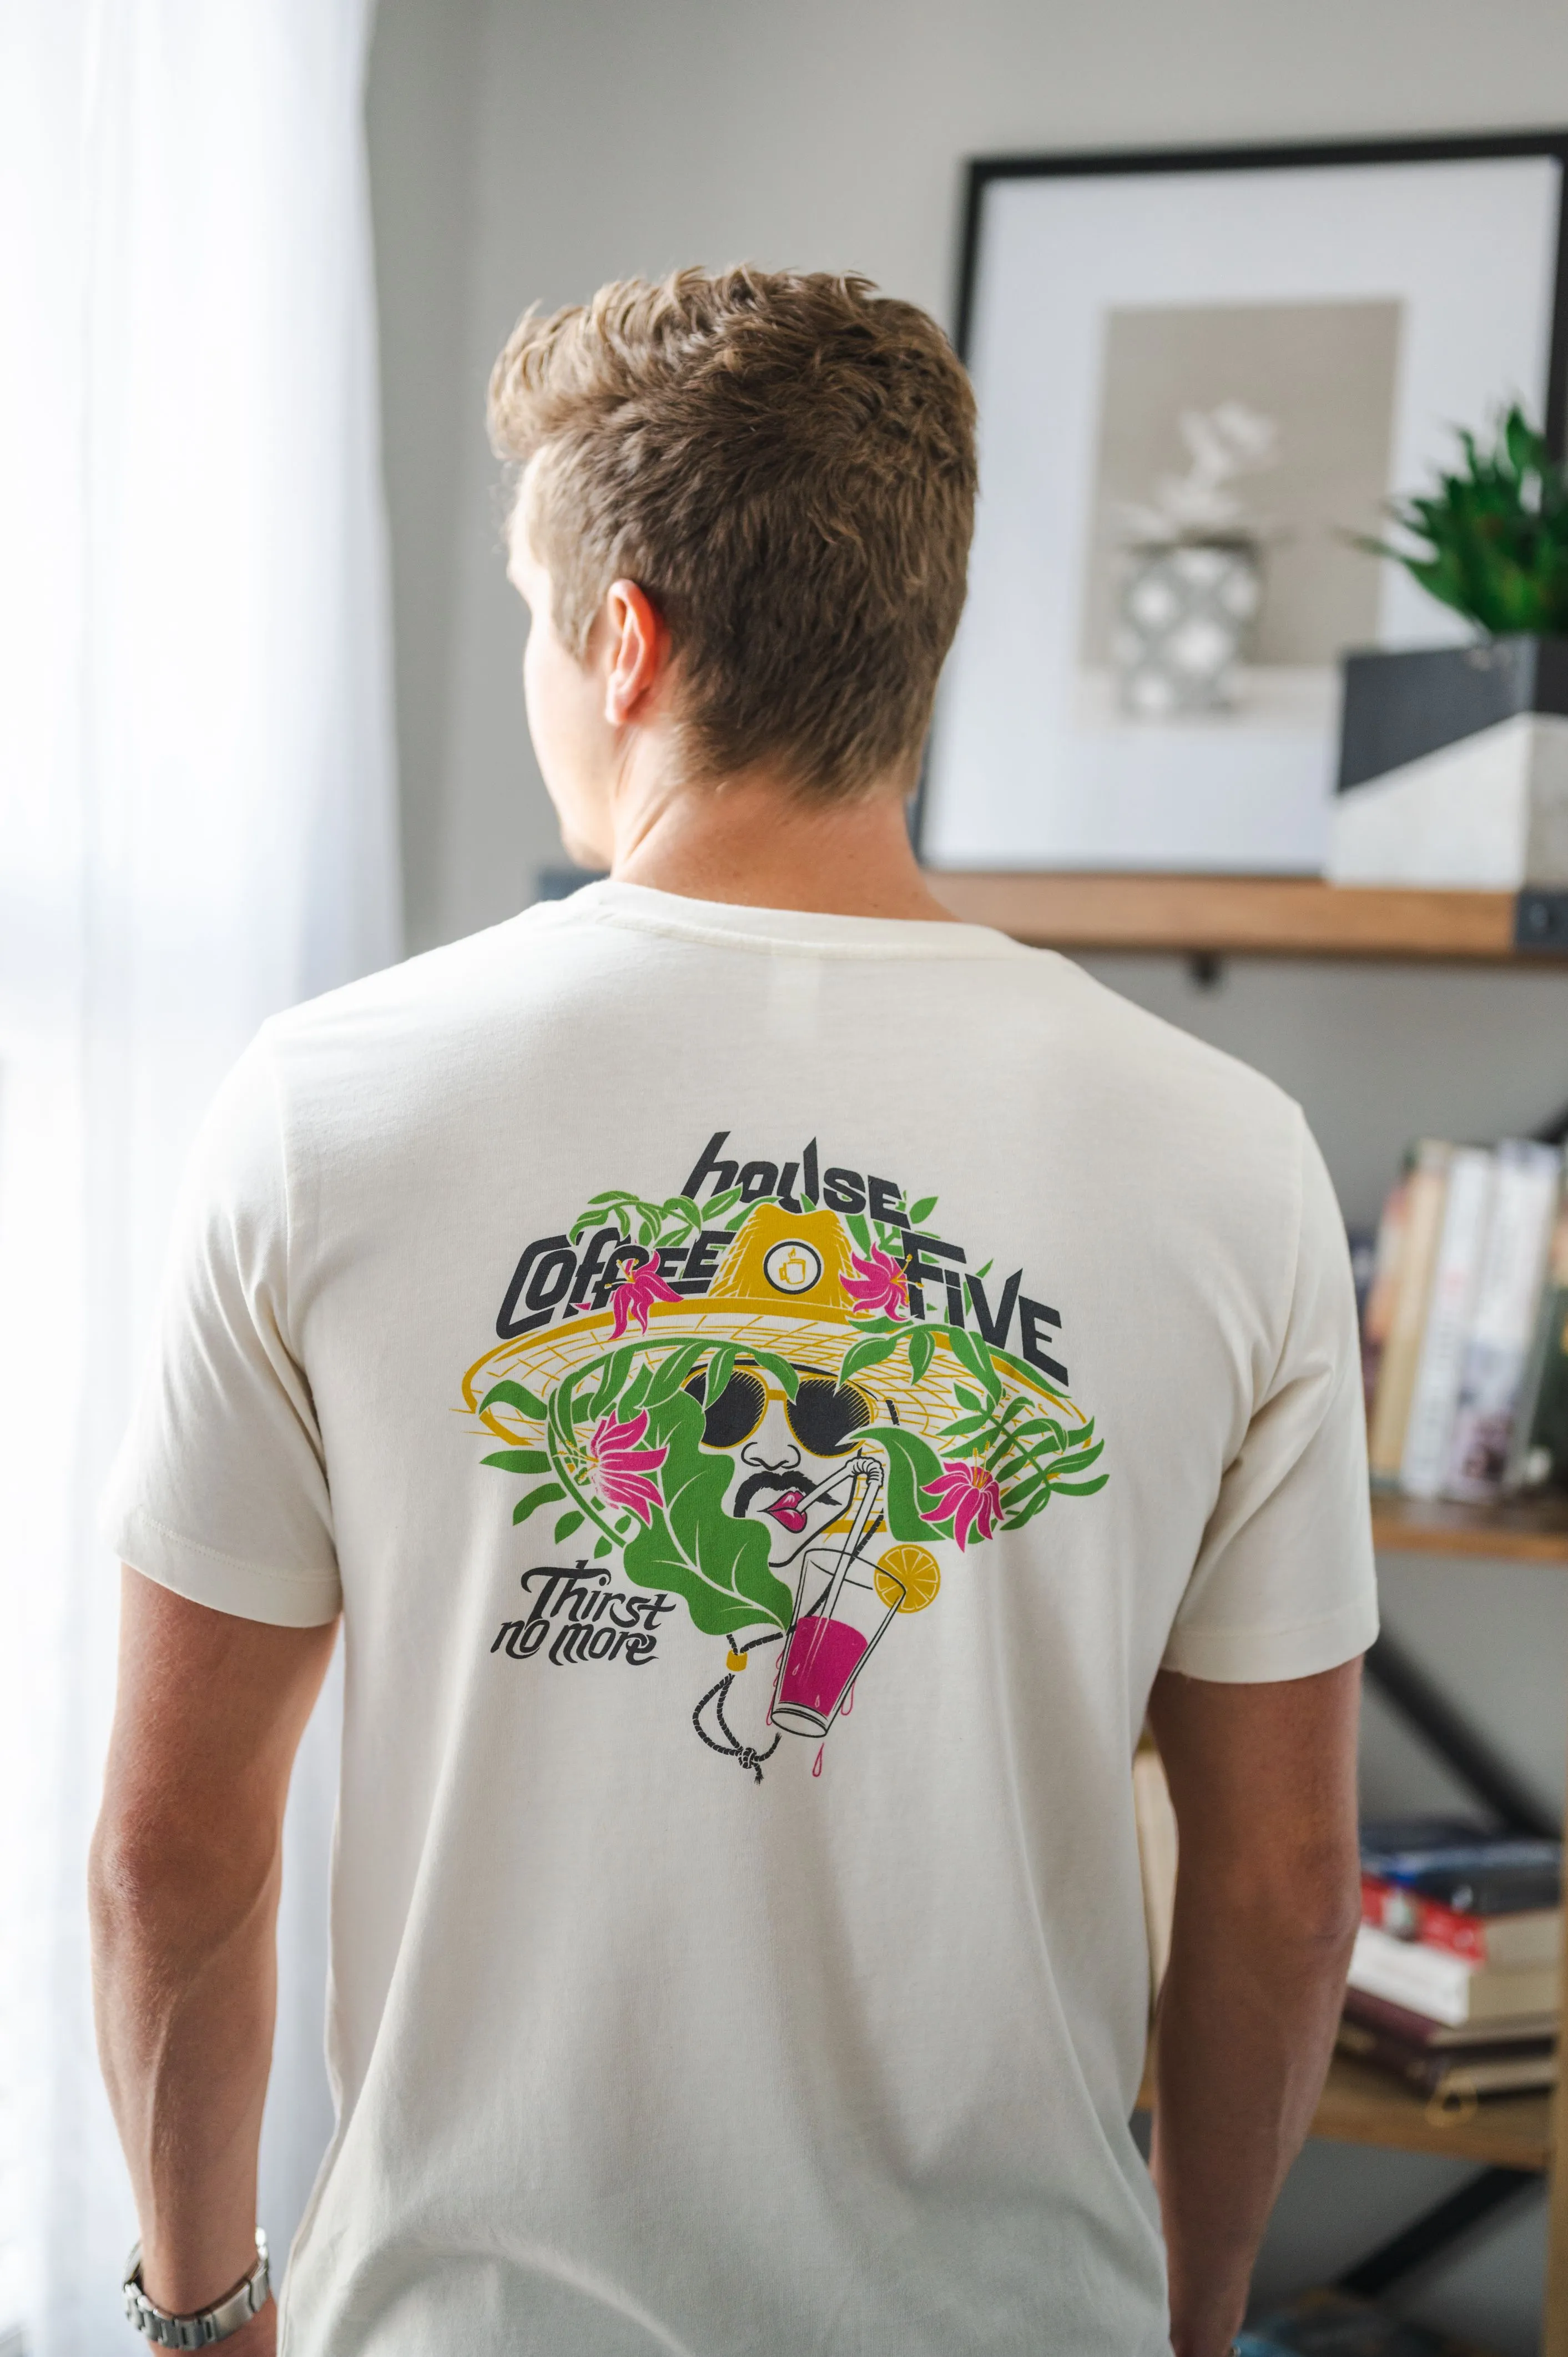 Rear view of a person wearing a white t-shirt with a colorful graphic print, standing in a room with a bookshelf and framed art in the background.